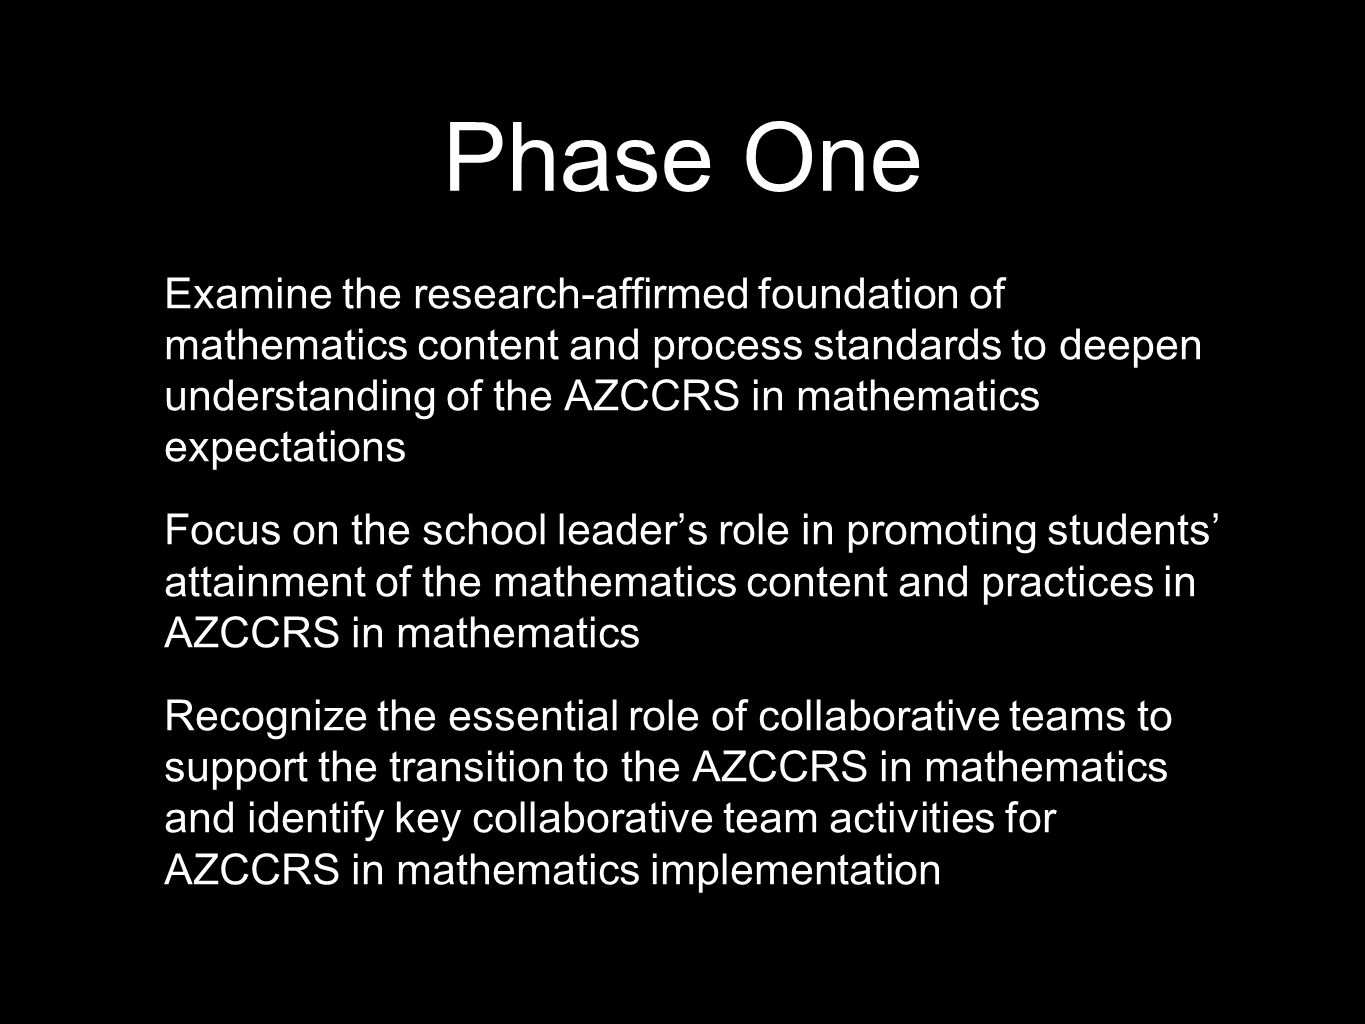 Phase One Examine the research-affirmed foundation of mathematics content and process standards to deepen understanding of the AZCCRS in mathematics expectations Focus on the school leader’s role in promoting students’ attainment of the mathematics content and practices in AZCCRS in mathematics Recognize the essential role of collaborative teams to support the transition to the AZCCRS in mathematics and identify key collaborative team activities for AZCCRS in mathematics implementation